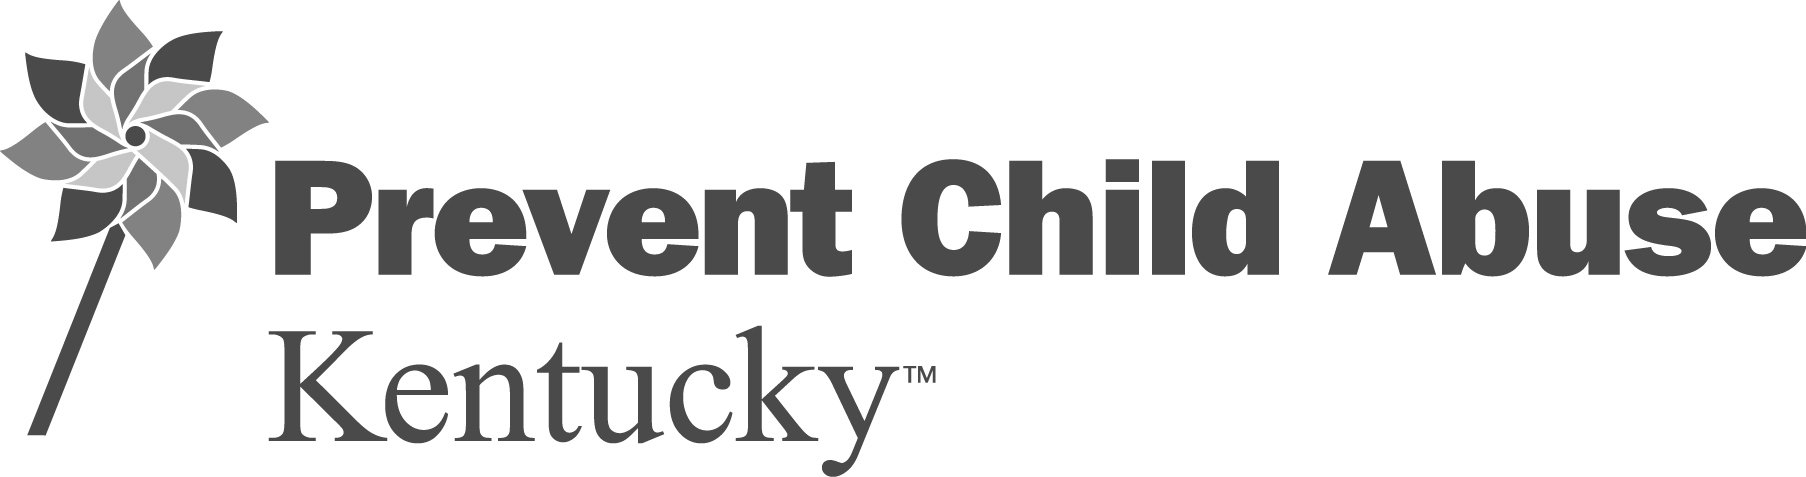 Prevent Child Abuse Kentucky: Because Parenting is